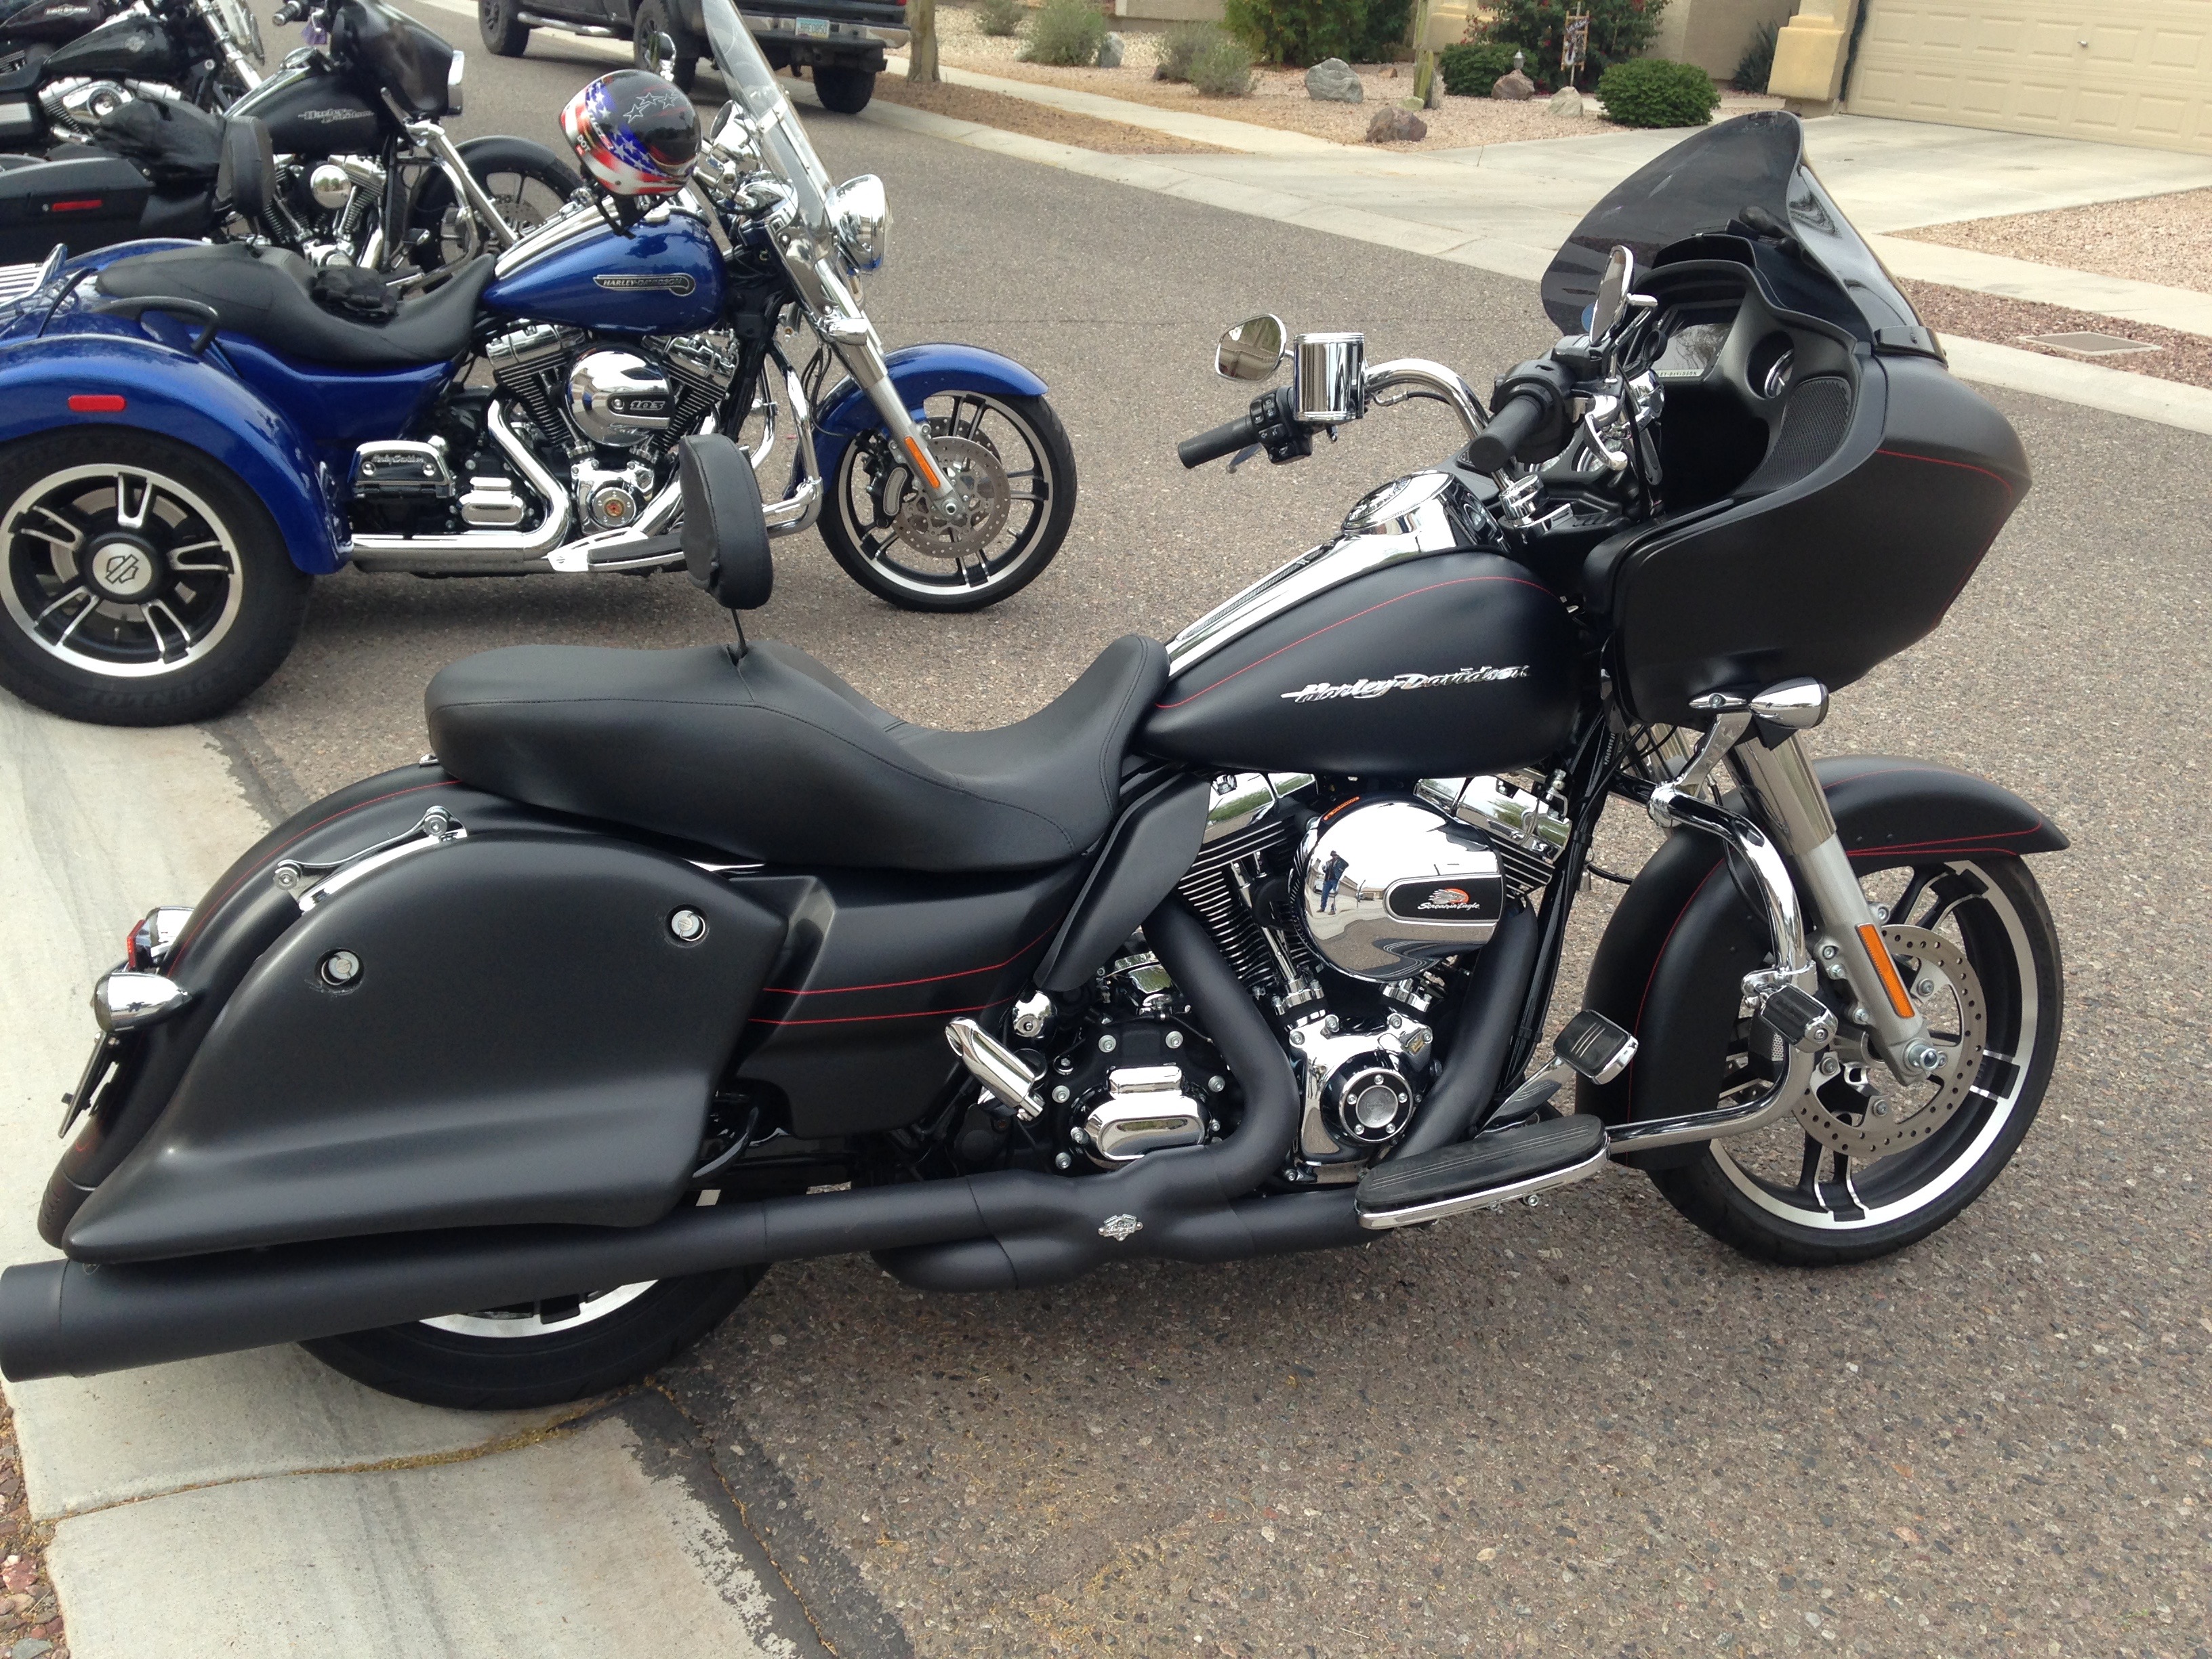 2014 Road King - Bagless and other mods.